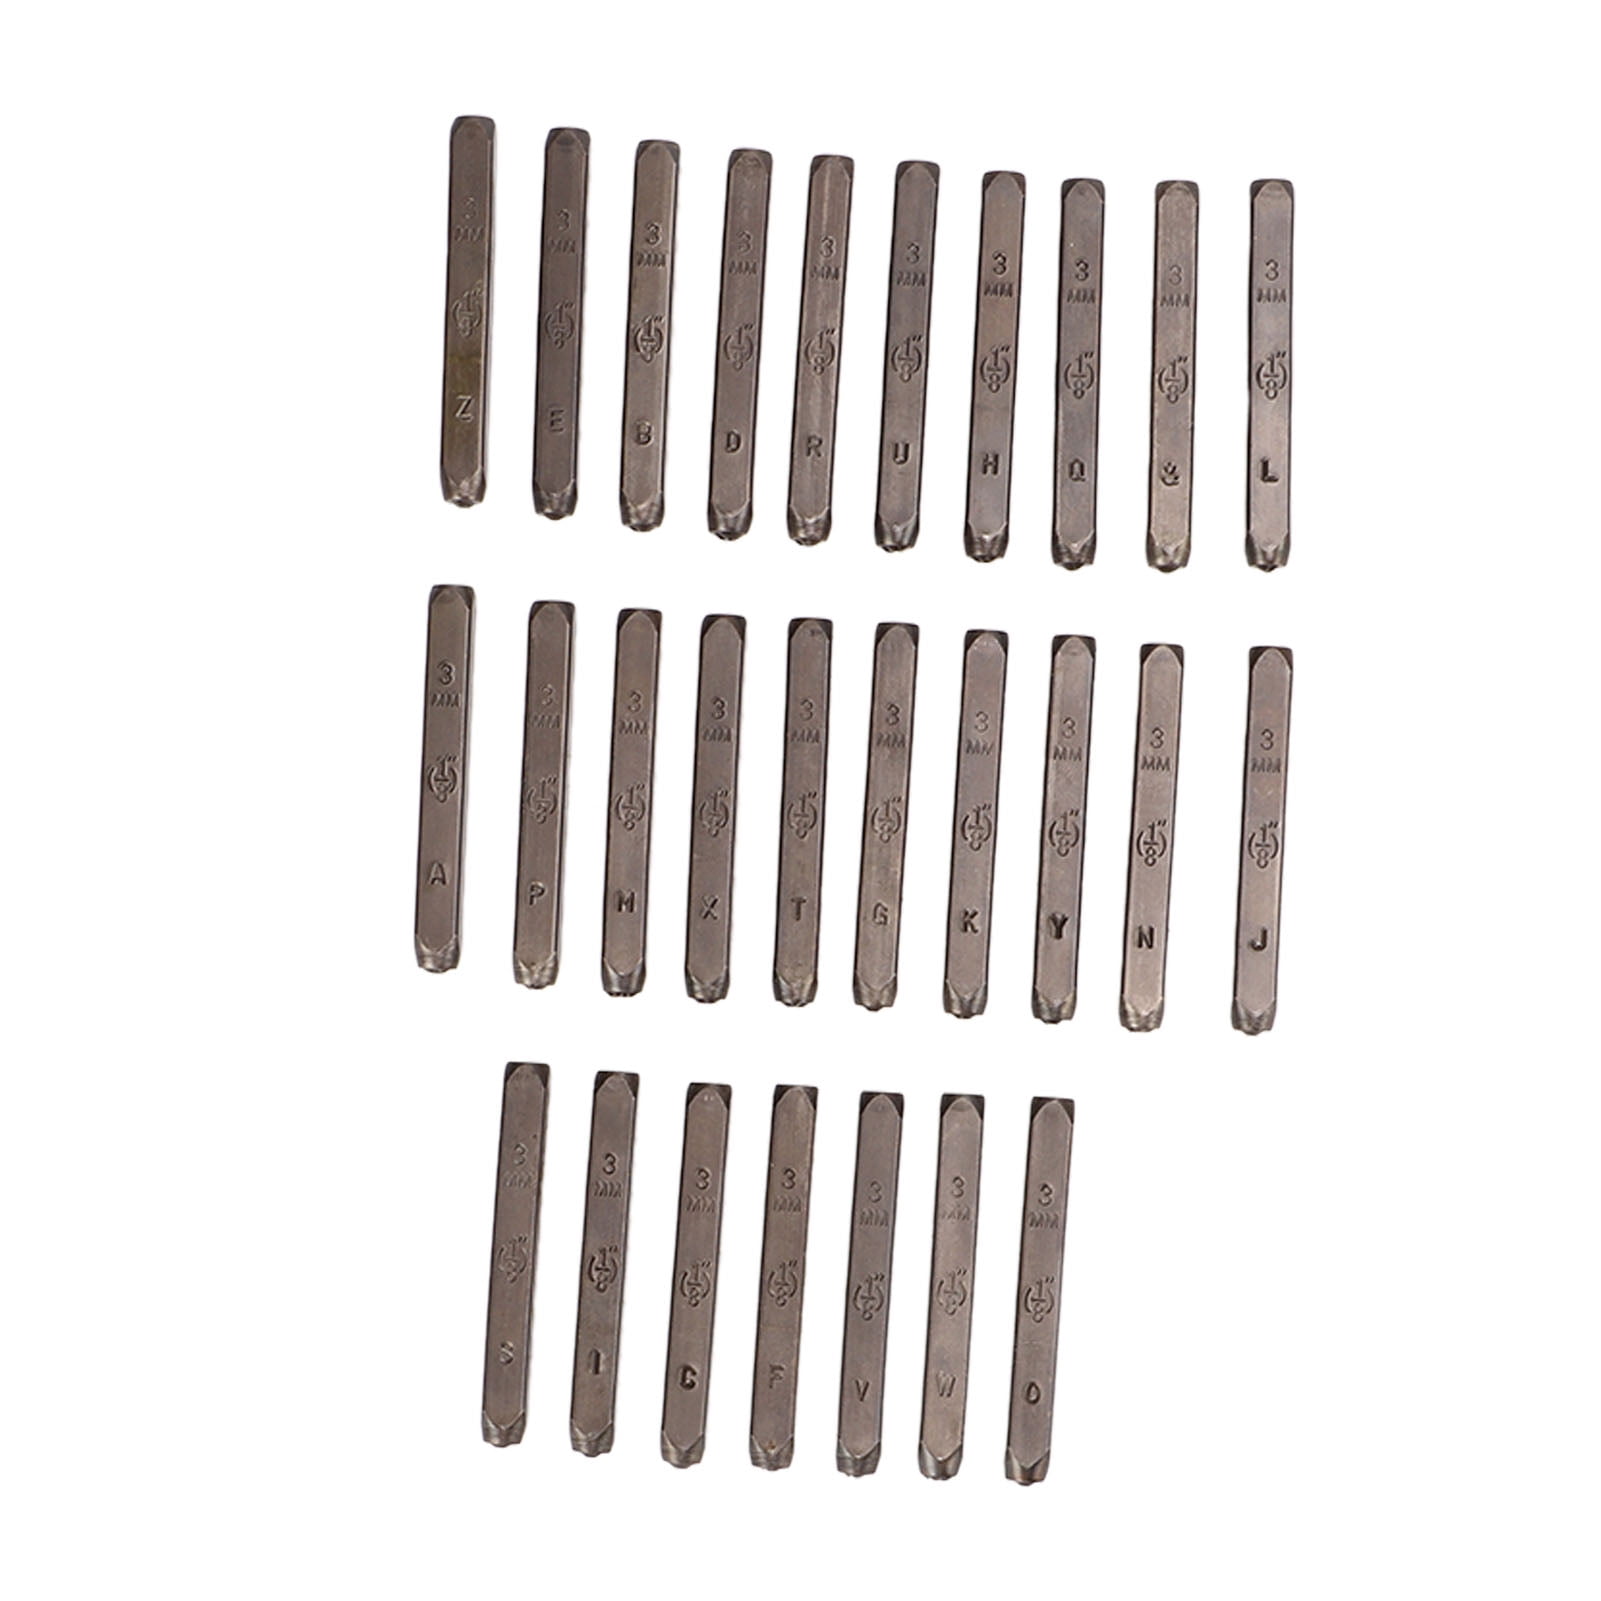 Letter Punch, 27pcs Metal Letter Set With Storage Box Strong Impact High  Carbon Steel Letter Punch Set For Metal Jewelry Leather Wood 